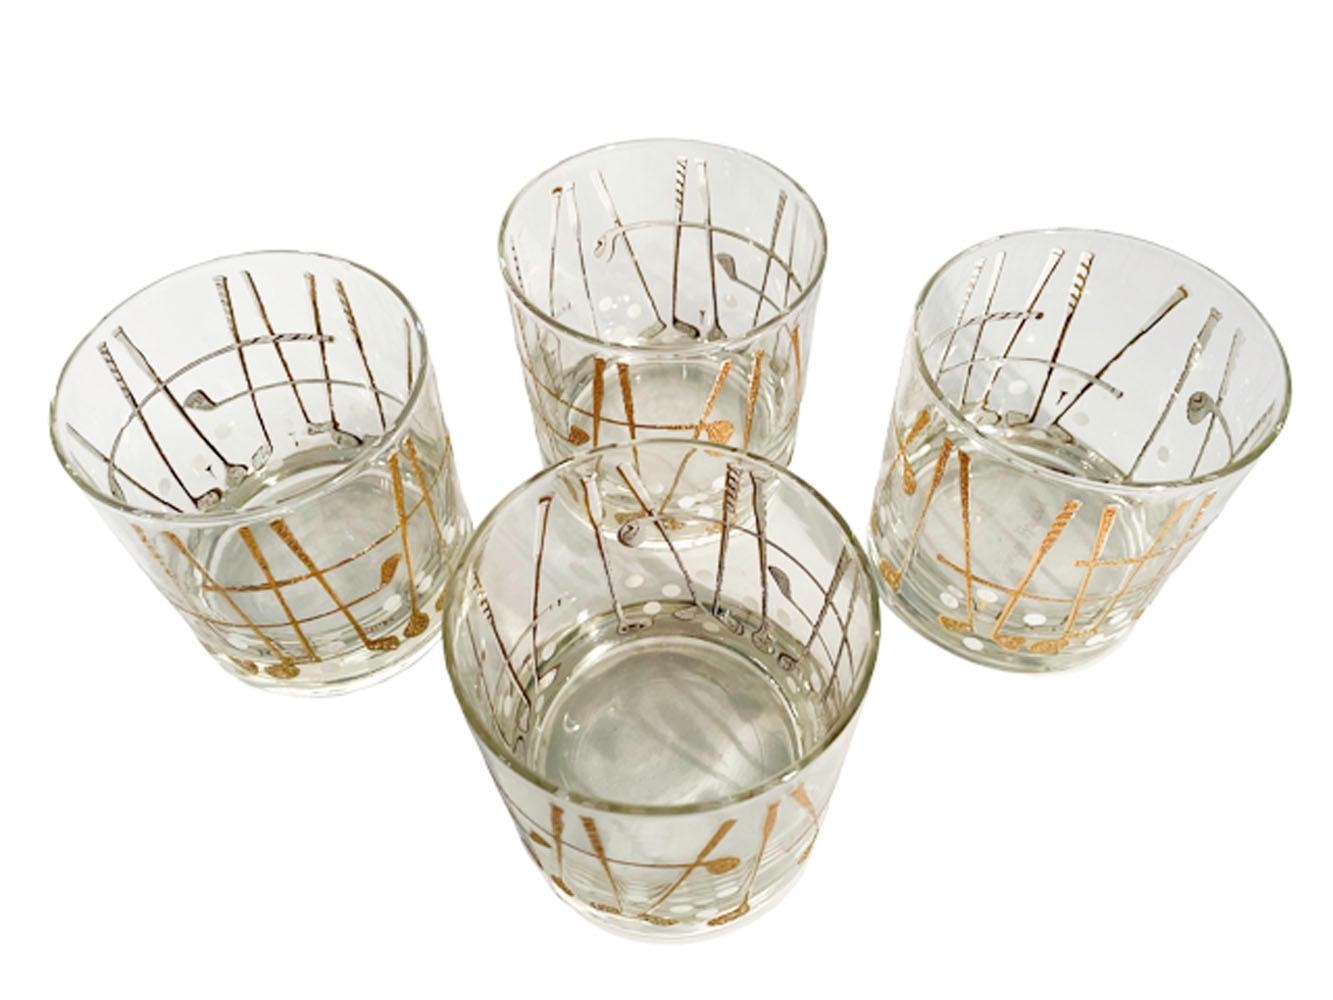 Four vintage Georges Briard golf theme glasses with raised white enamel clubs and balls, the clubs overlaid with 22 karat gold.